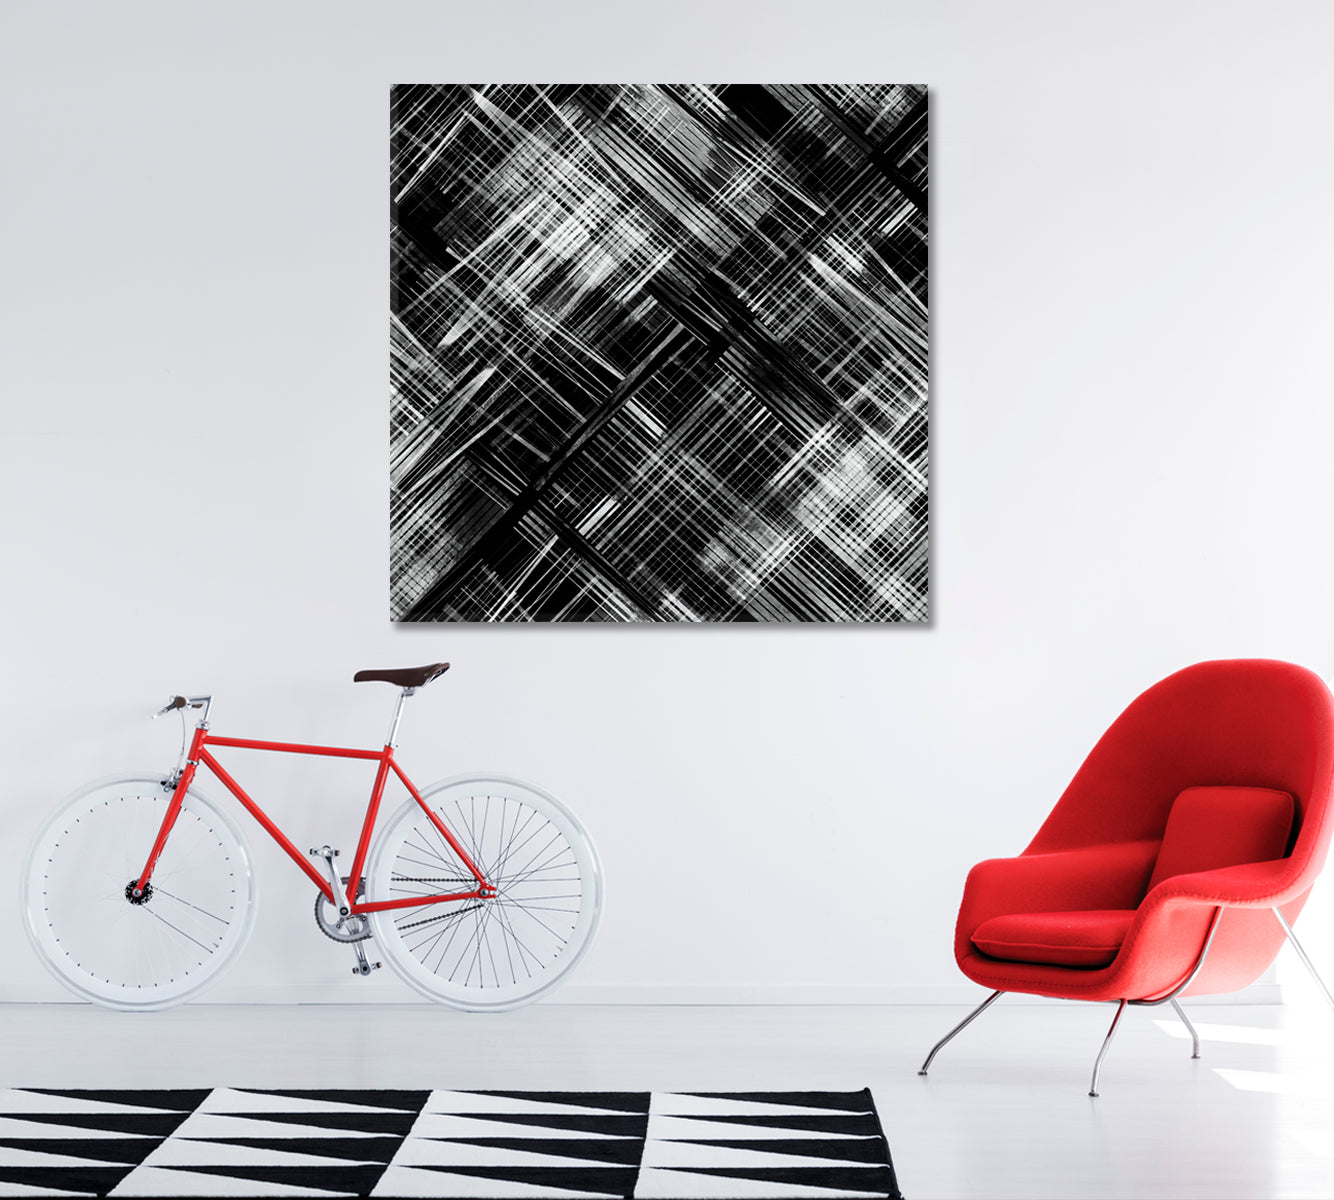 Black and White Abstraction Canvas Print ArtLexy 1 Panel 12"x12" inches 